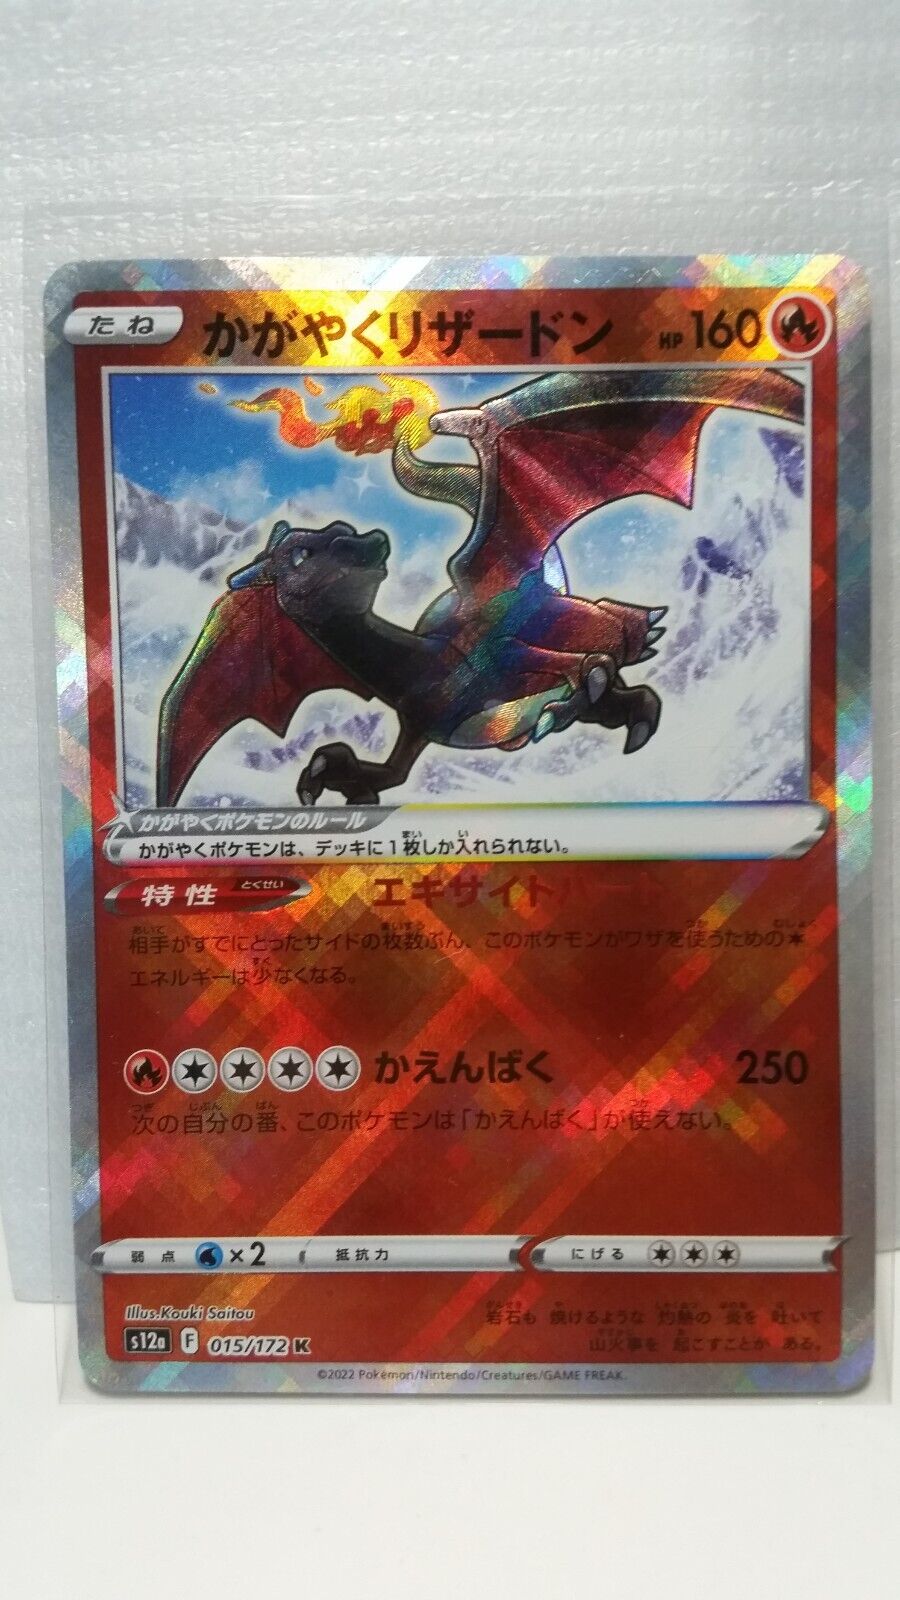 P-027 POKEMON CARDS RADIANT CHARIZARD s12a 015/172 JAPAN NM CONDITION